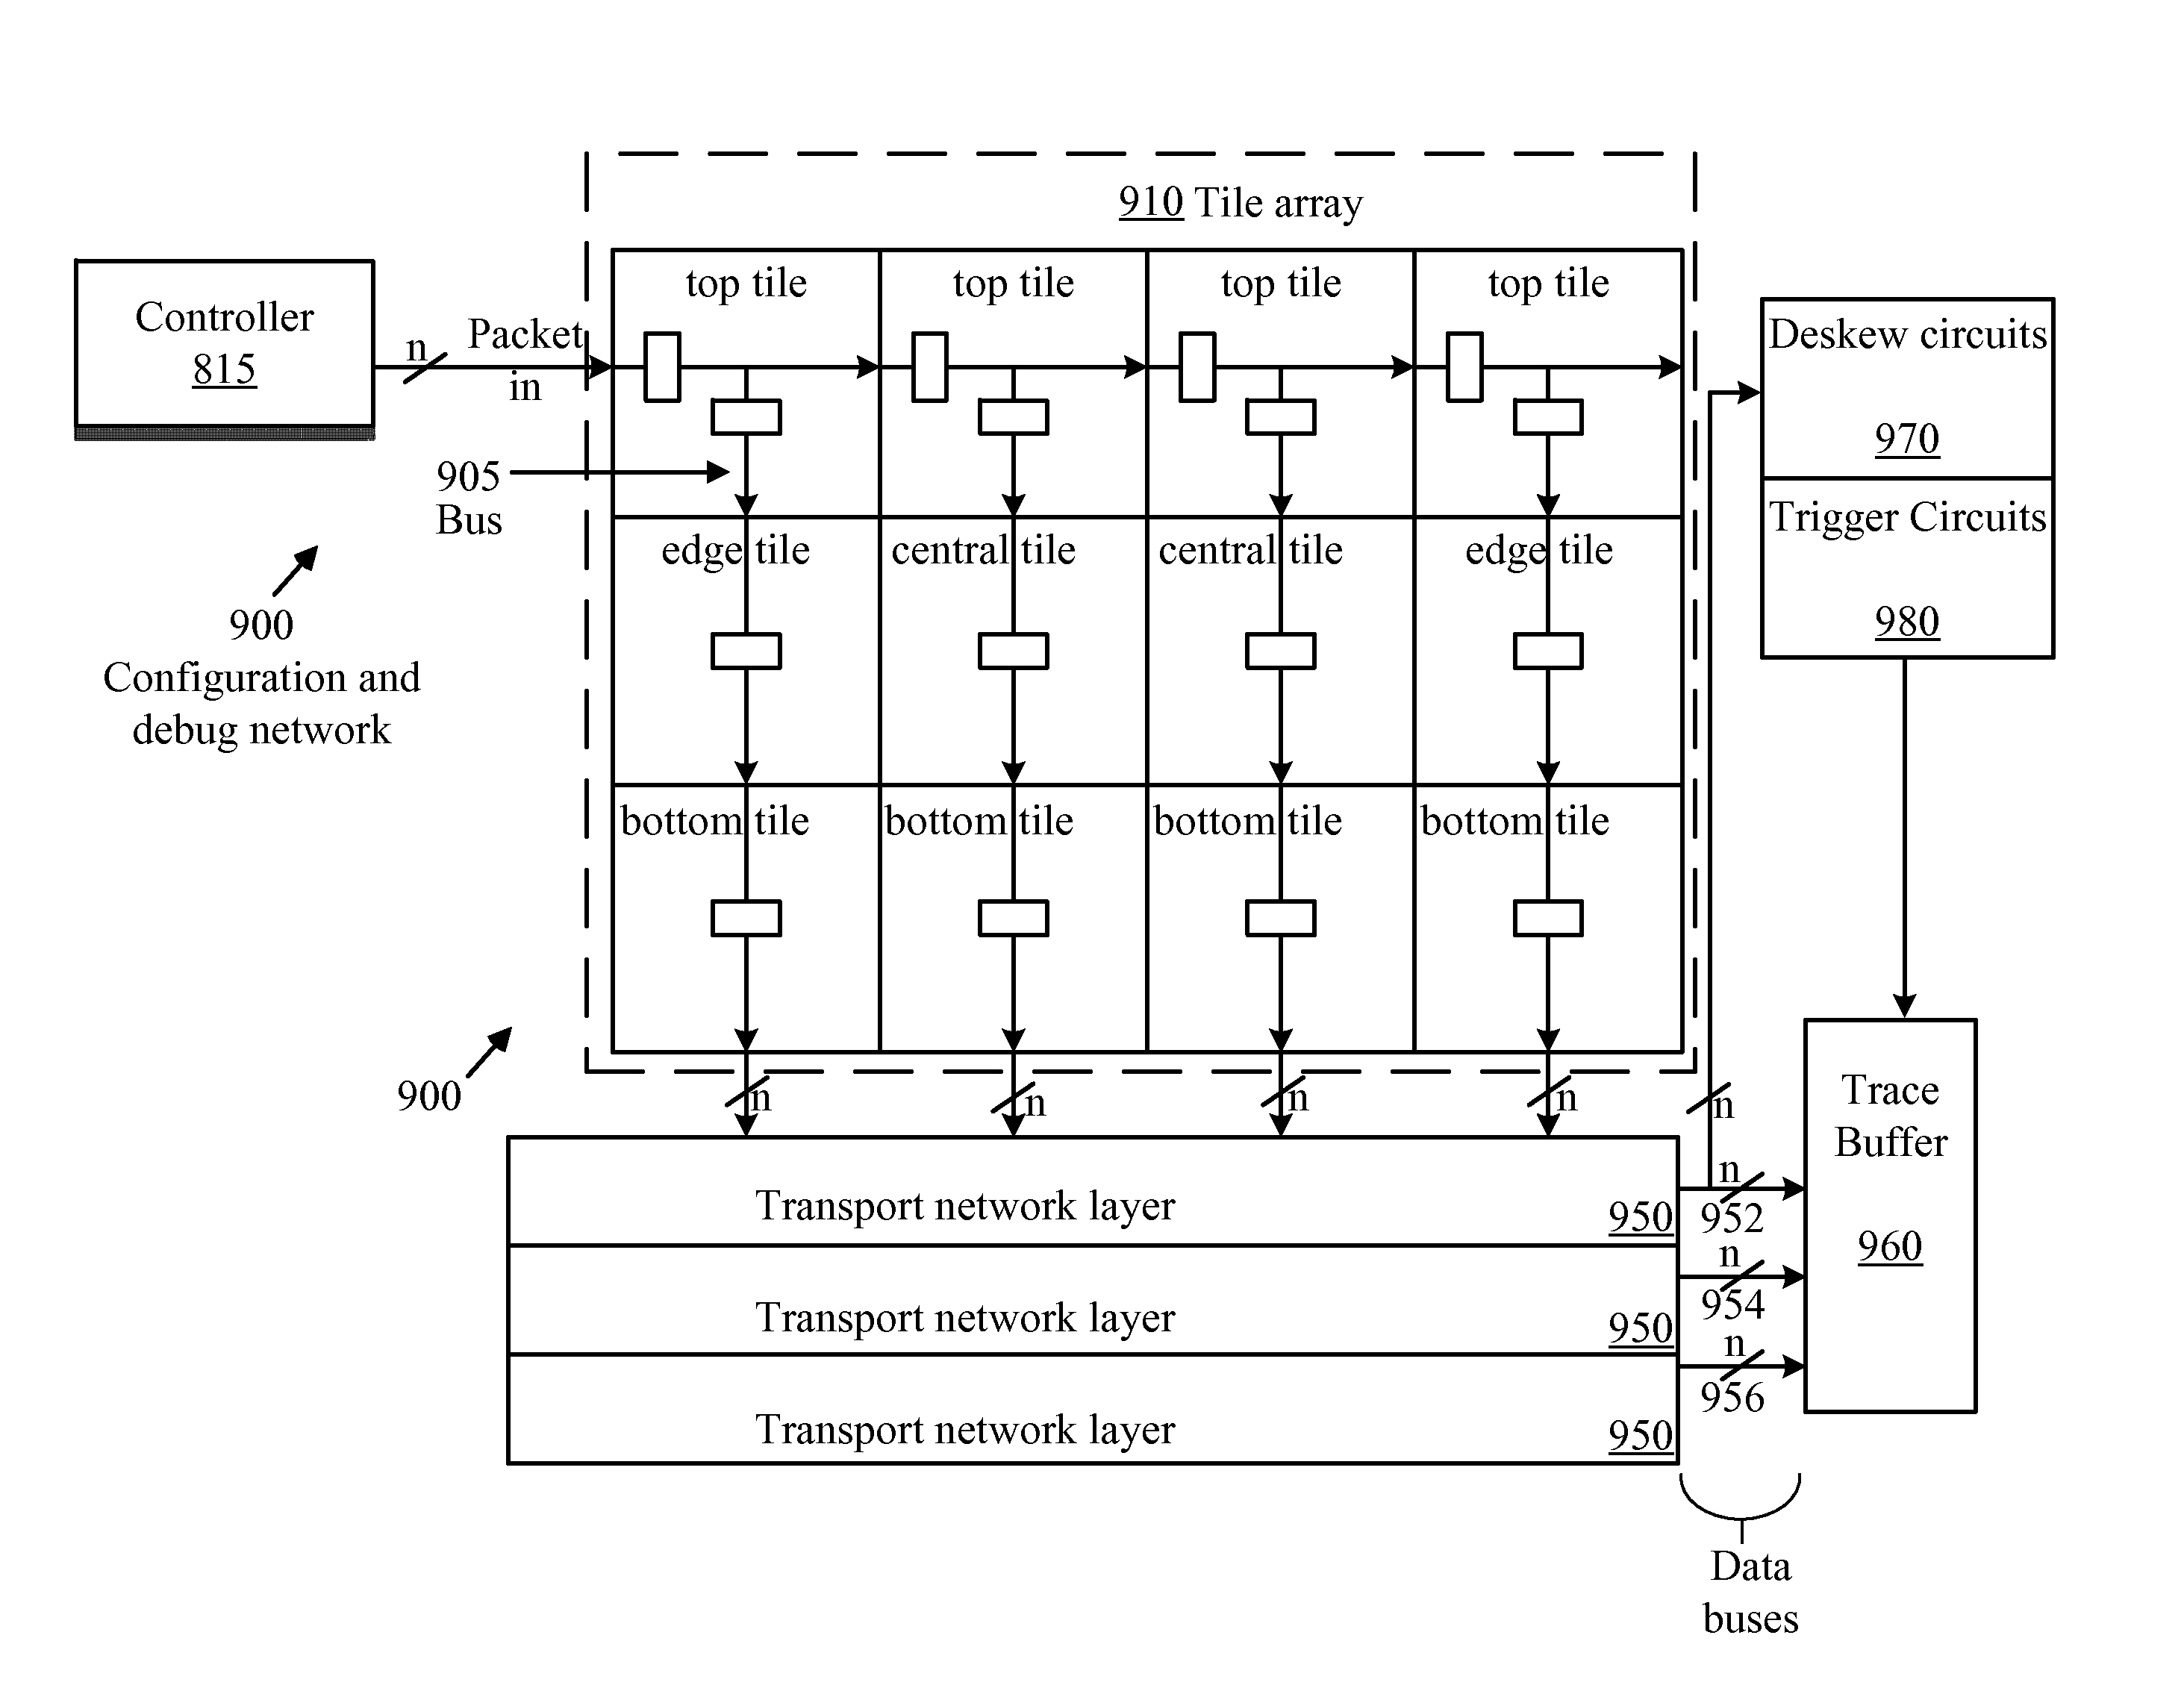 Retrieving data from a configurable IC